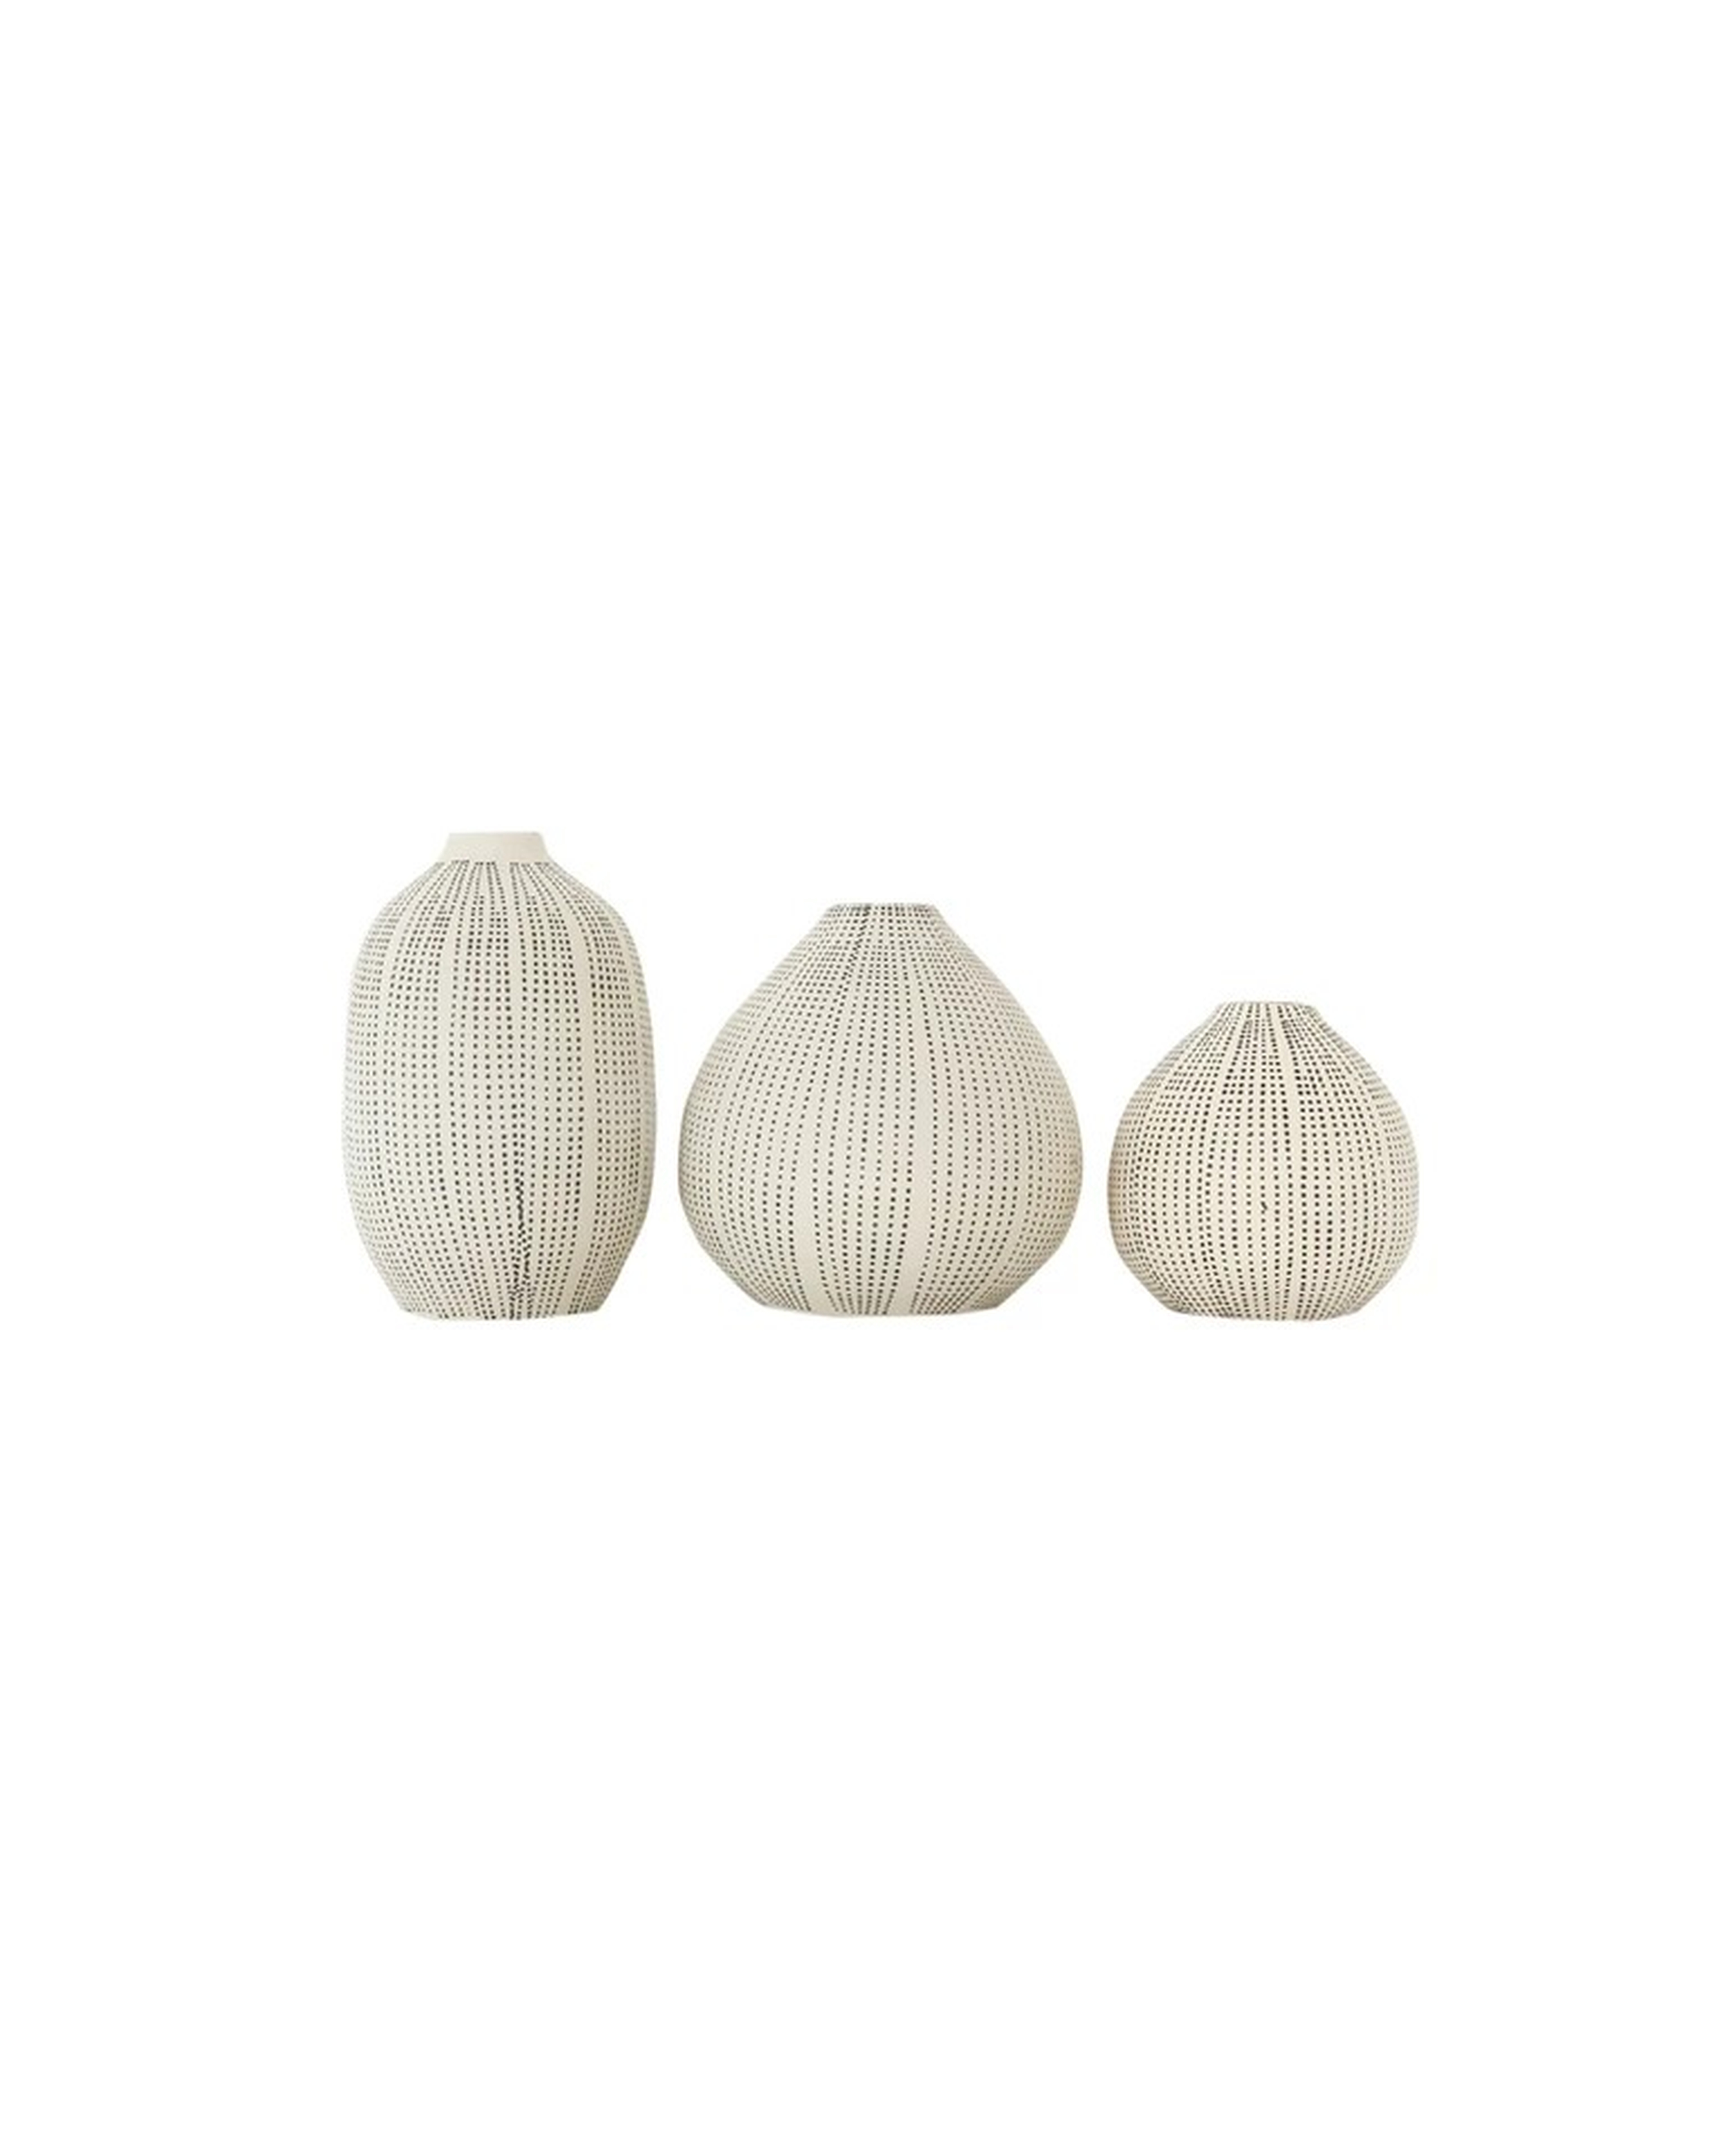 DOTTED VASE (SET OF 3) - McGee & Co.